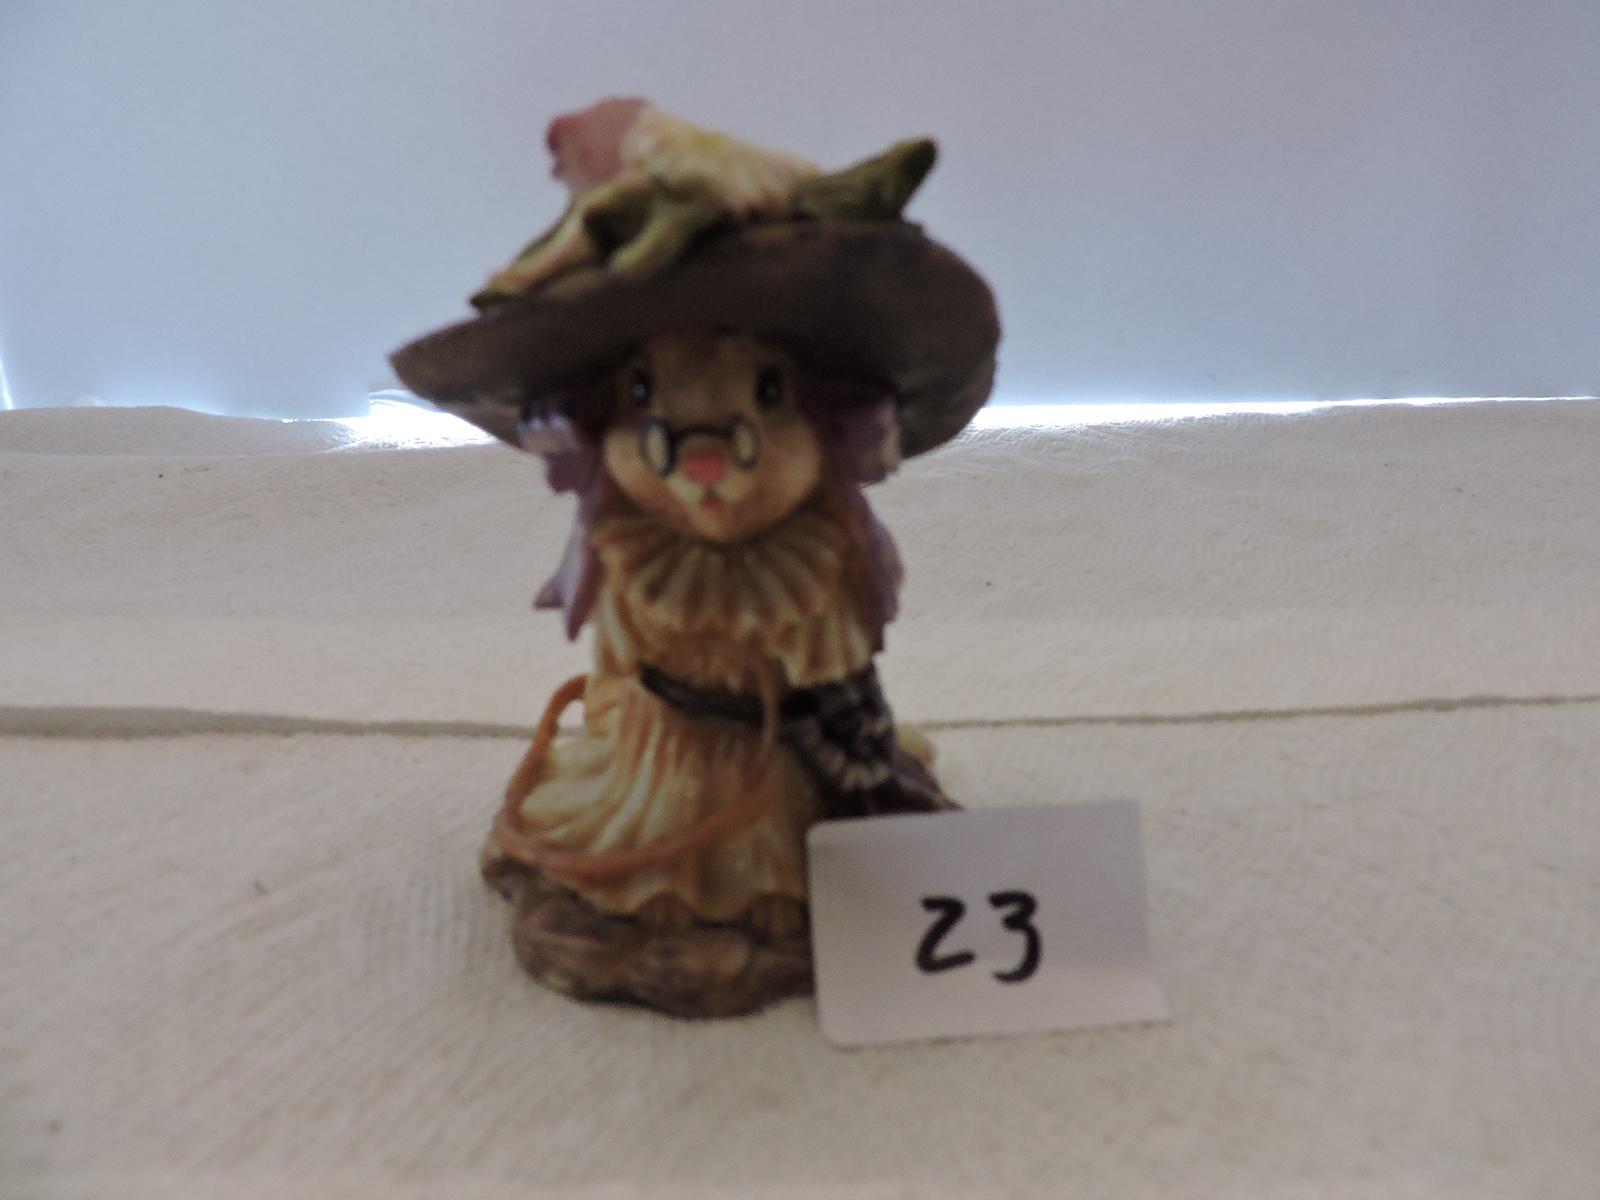 The Thickets At Sweetbriar Figurine, Orchid Beasley, Thinking of you, 1992, Bronwen Ross, 3 1/2"